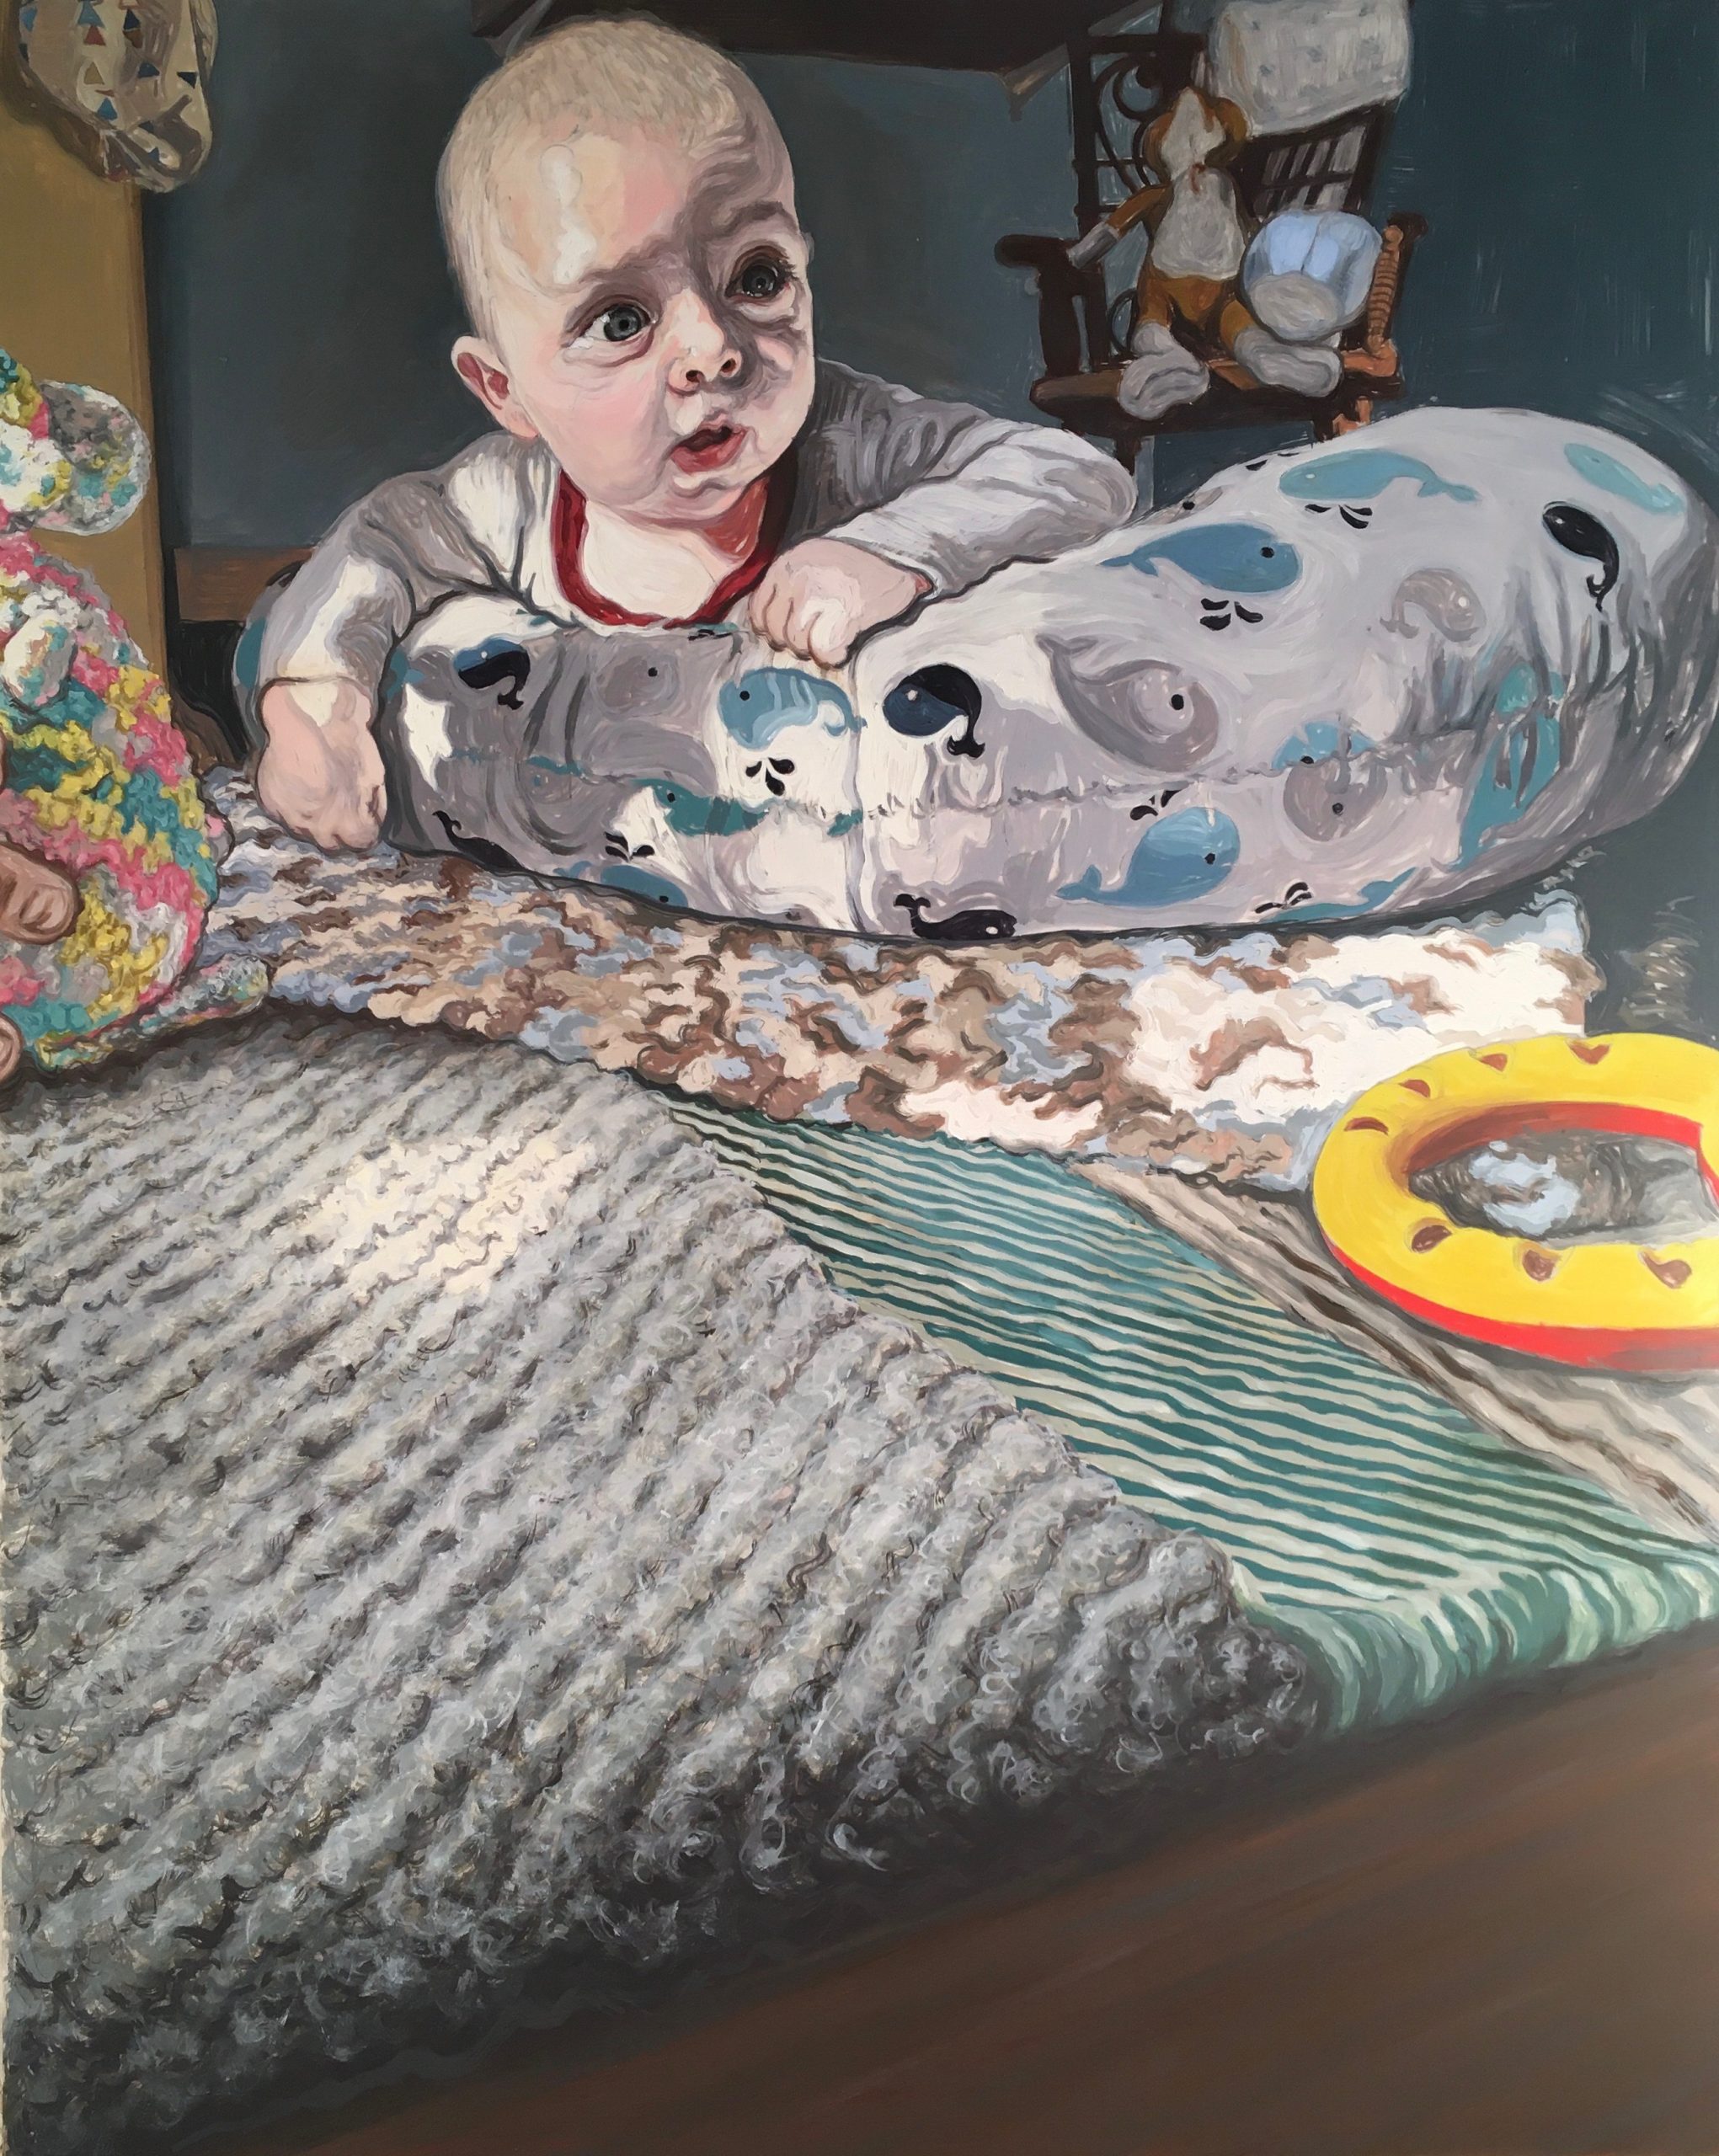 Painting of a baby by Misty Morrison